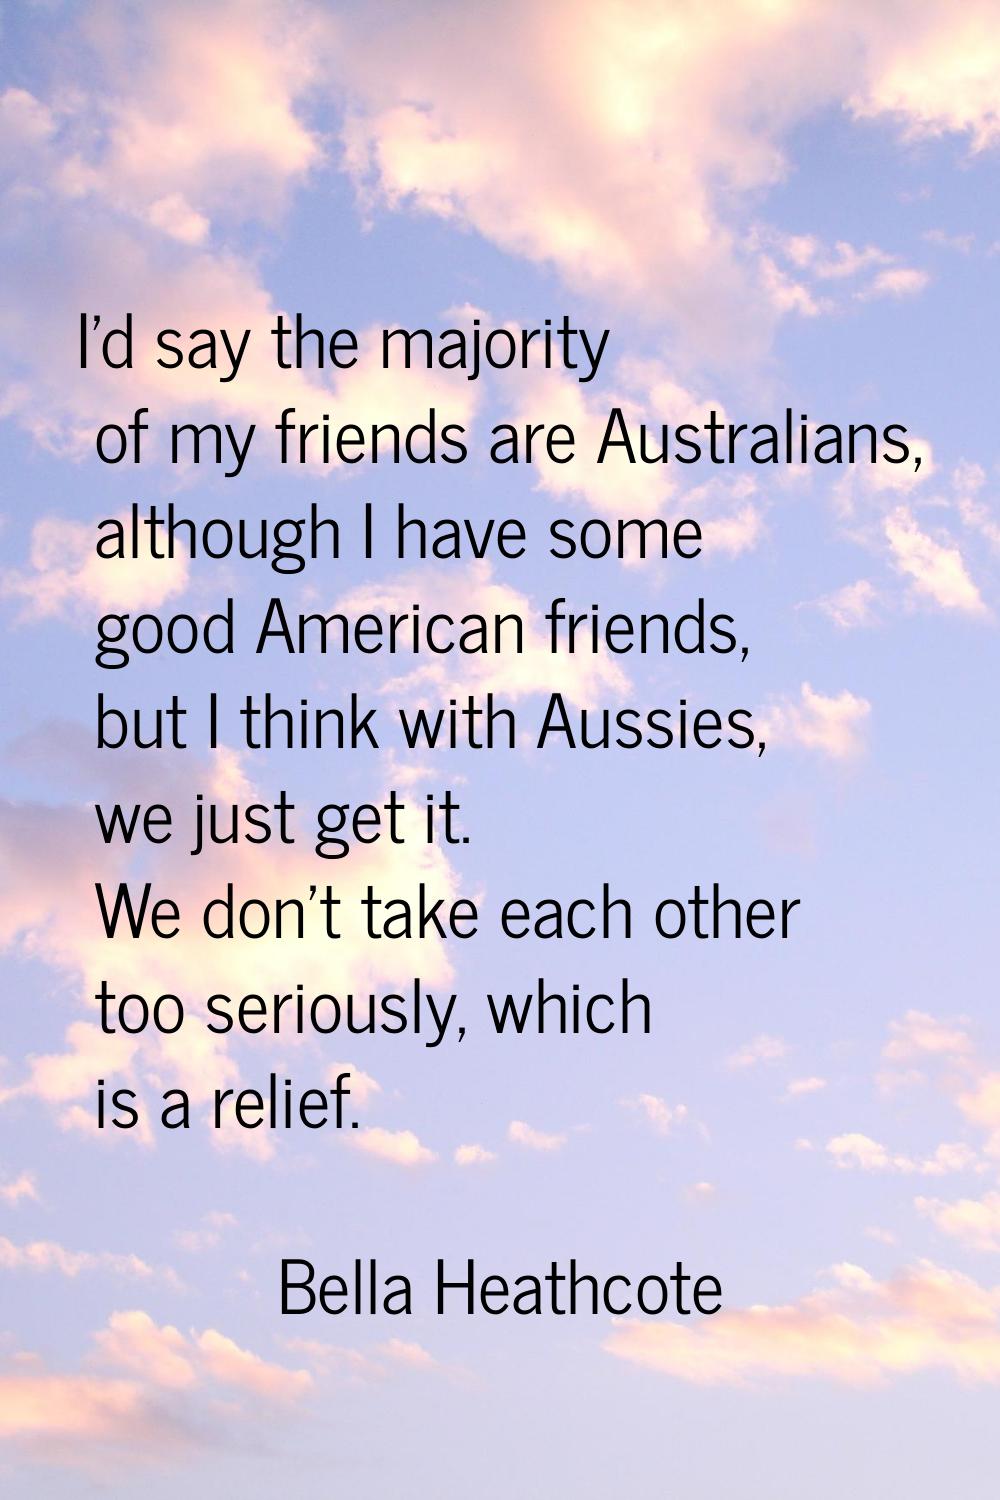 I'd say the majority of my friends are Australians, although I have some good American friends, but